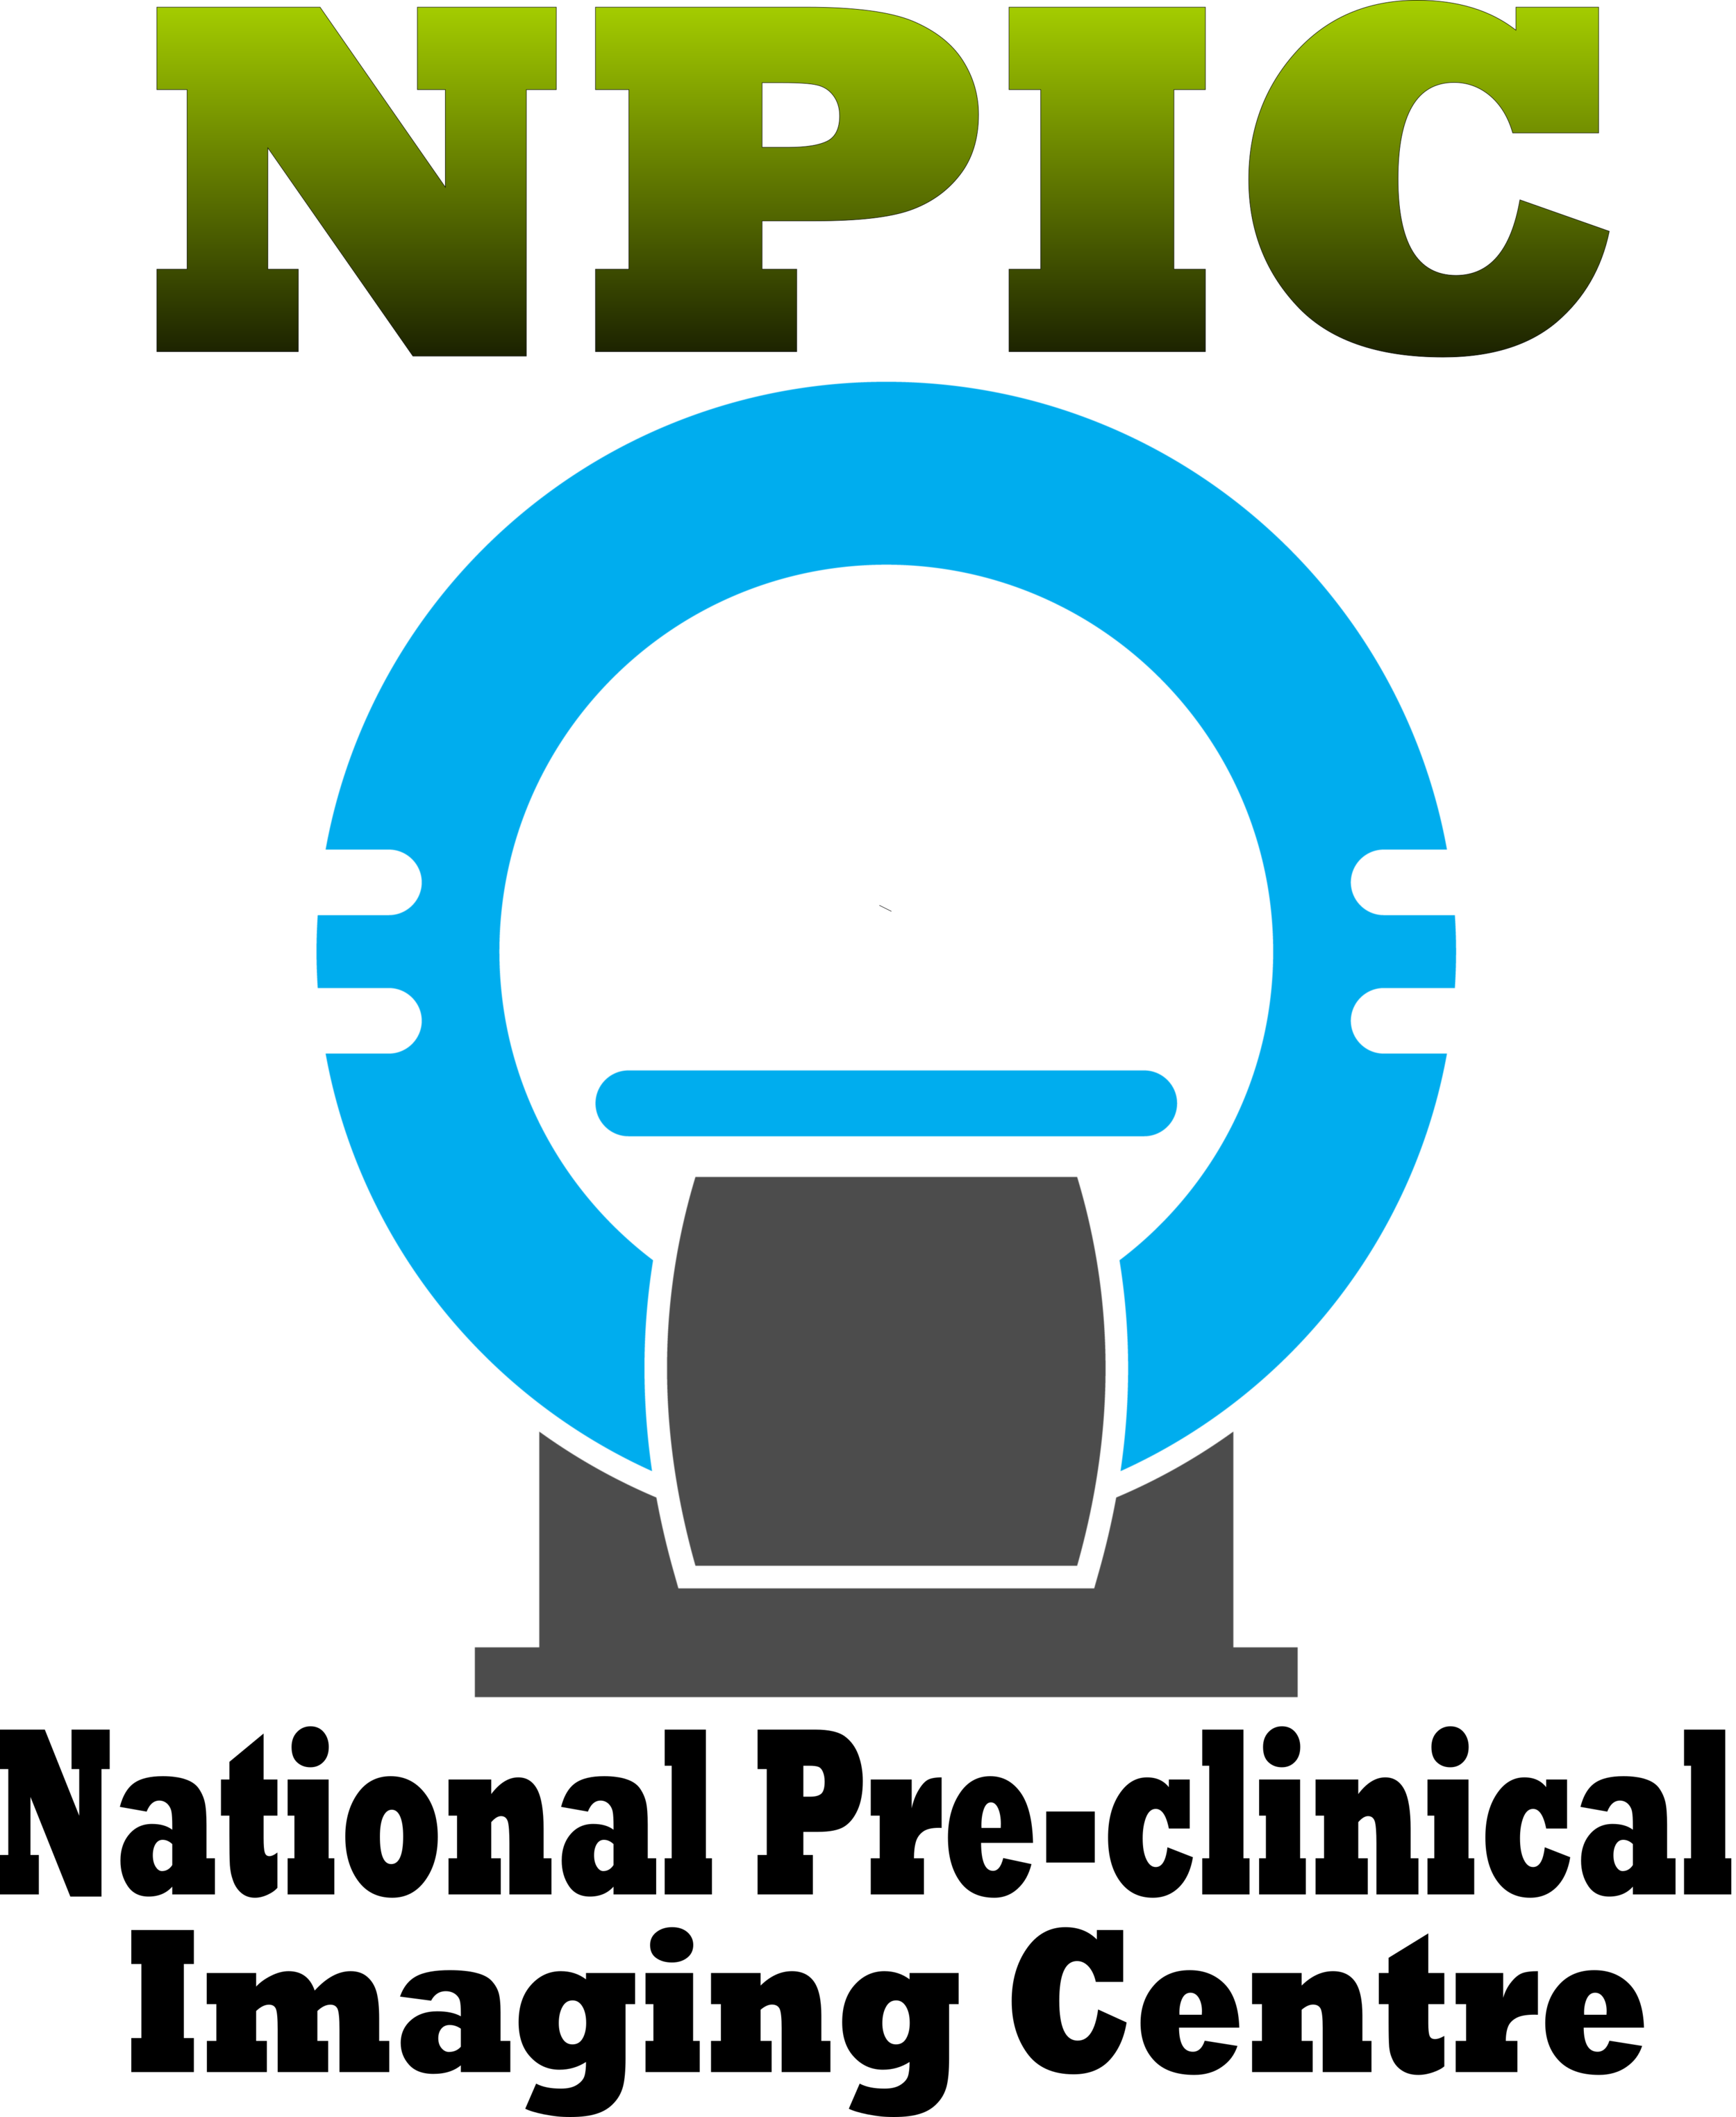 NPIC - National Preclinical Imaging Centre